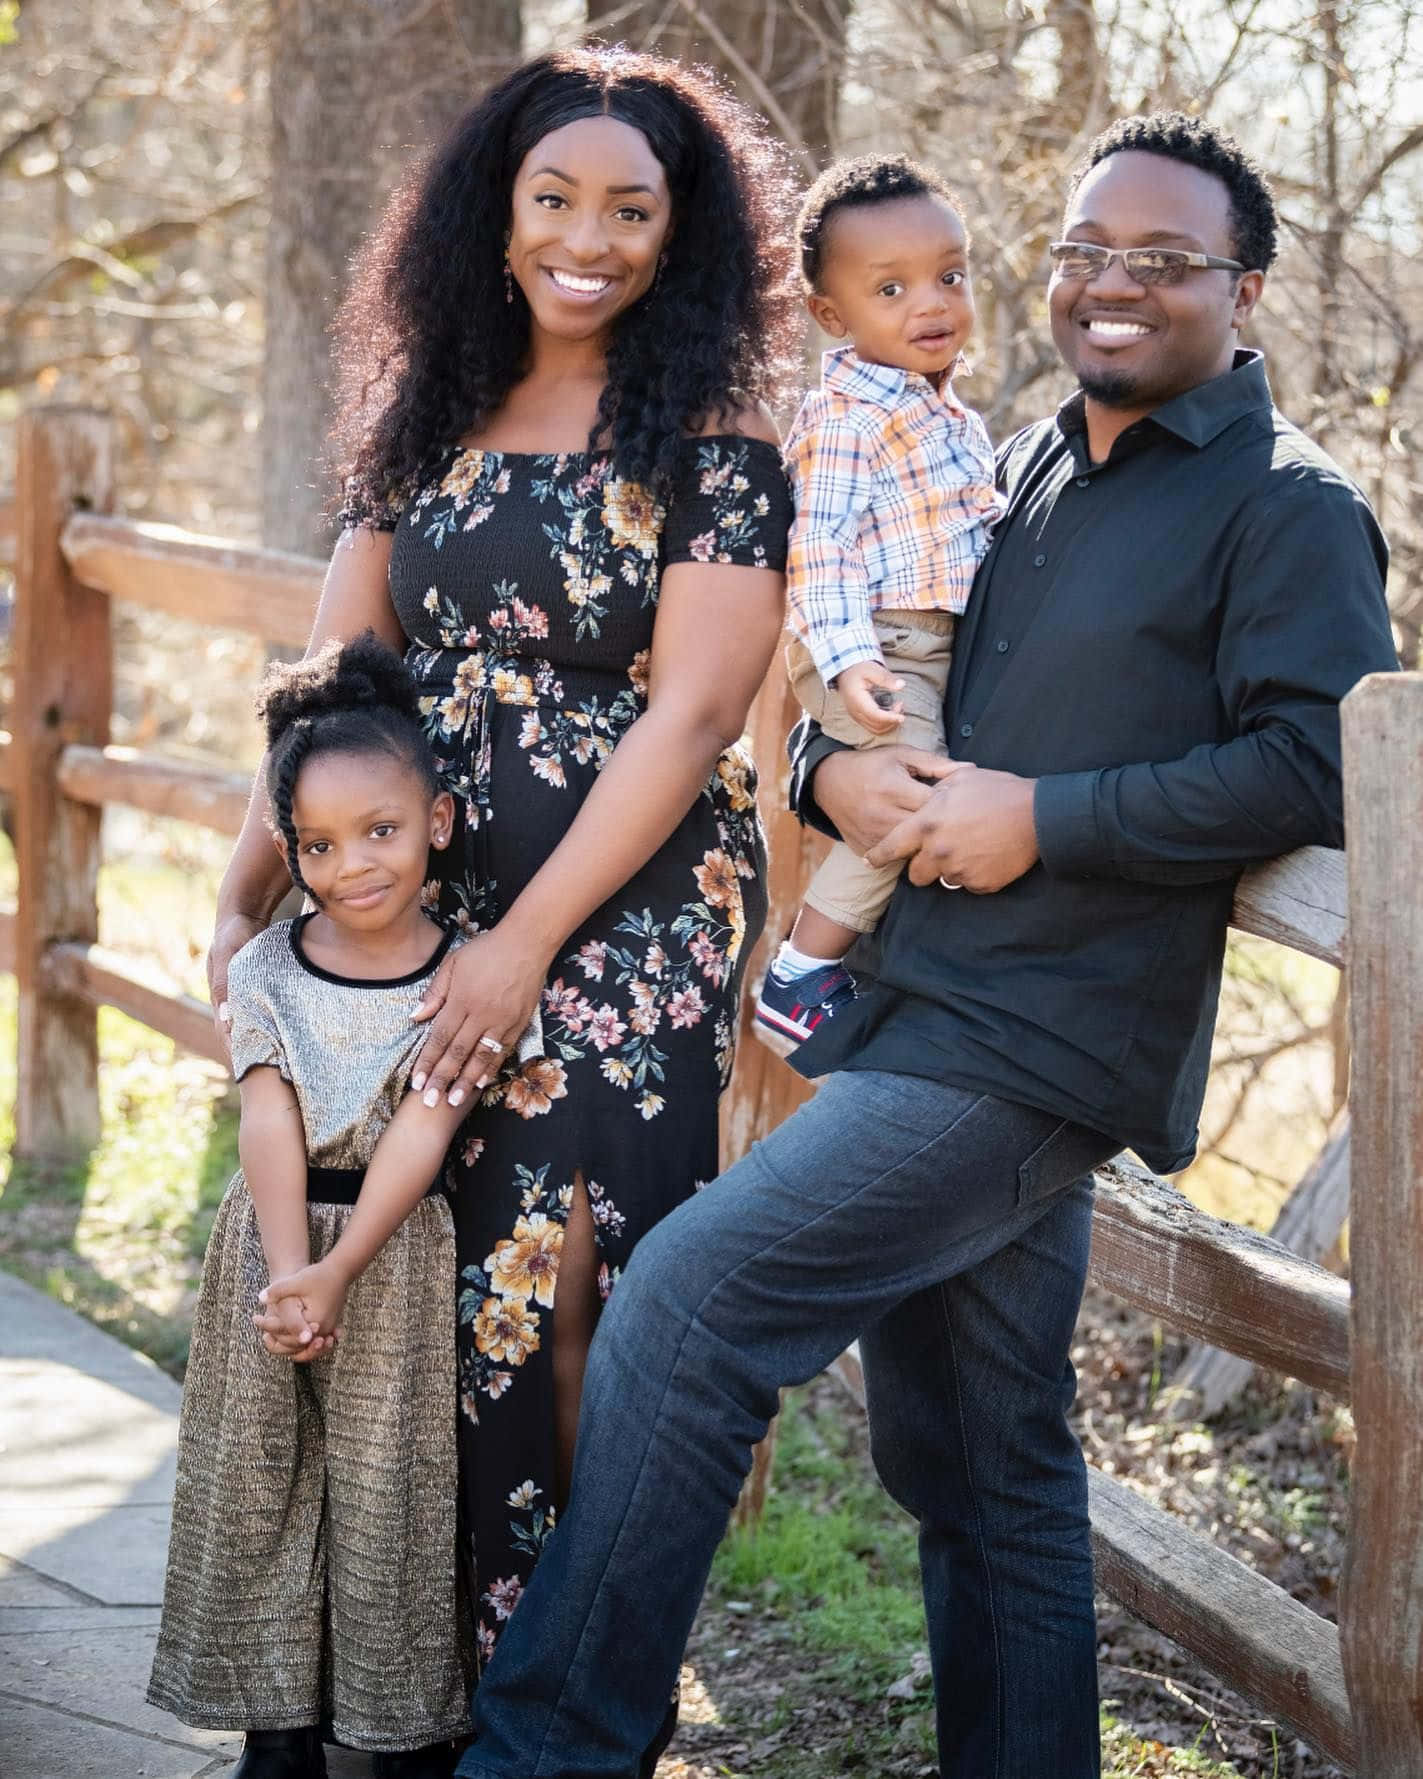 "A happy black family spending time together"